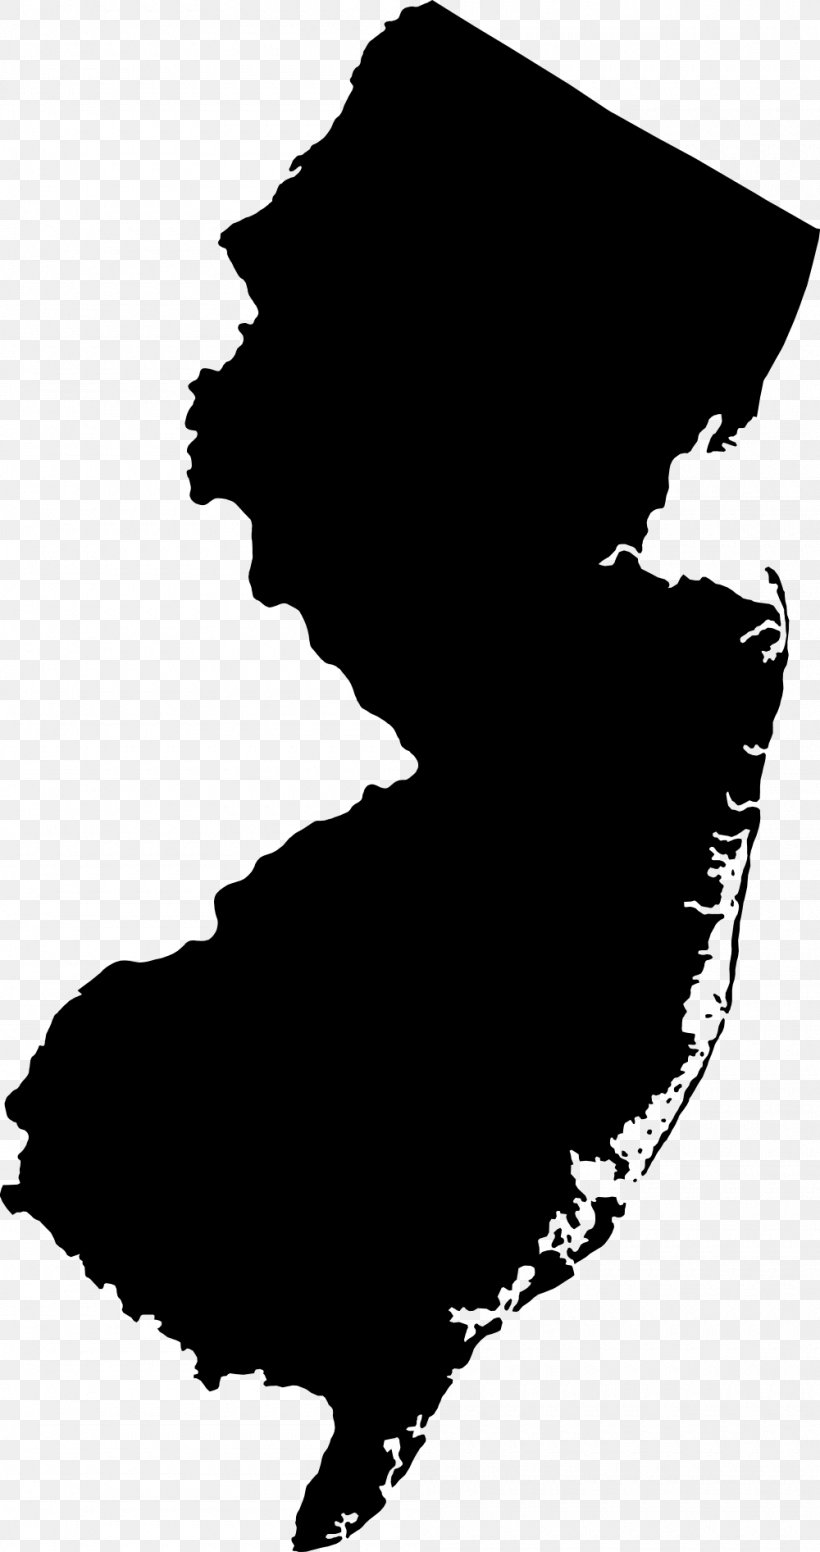 New Jersey T-shirt Map Clip Art, PNG, 1000x1893px, New Jersey, Art, Black, Black And White, Blank Map Download Free